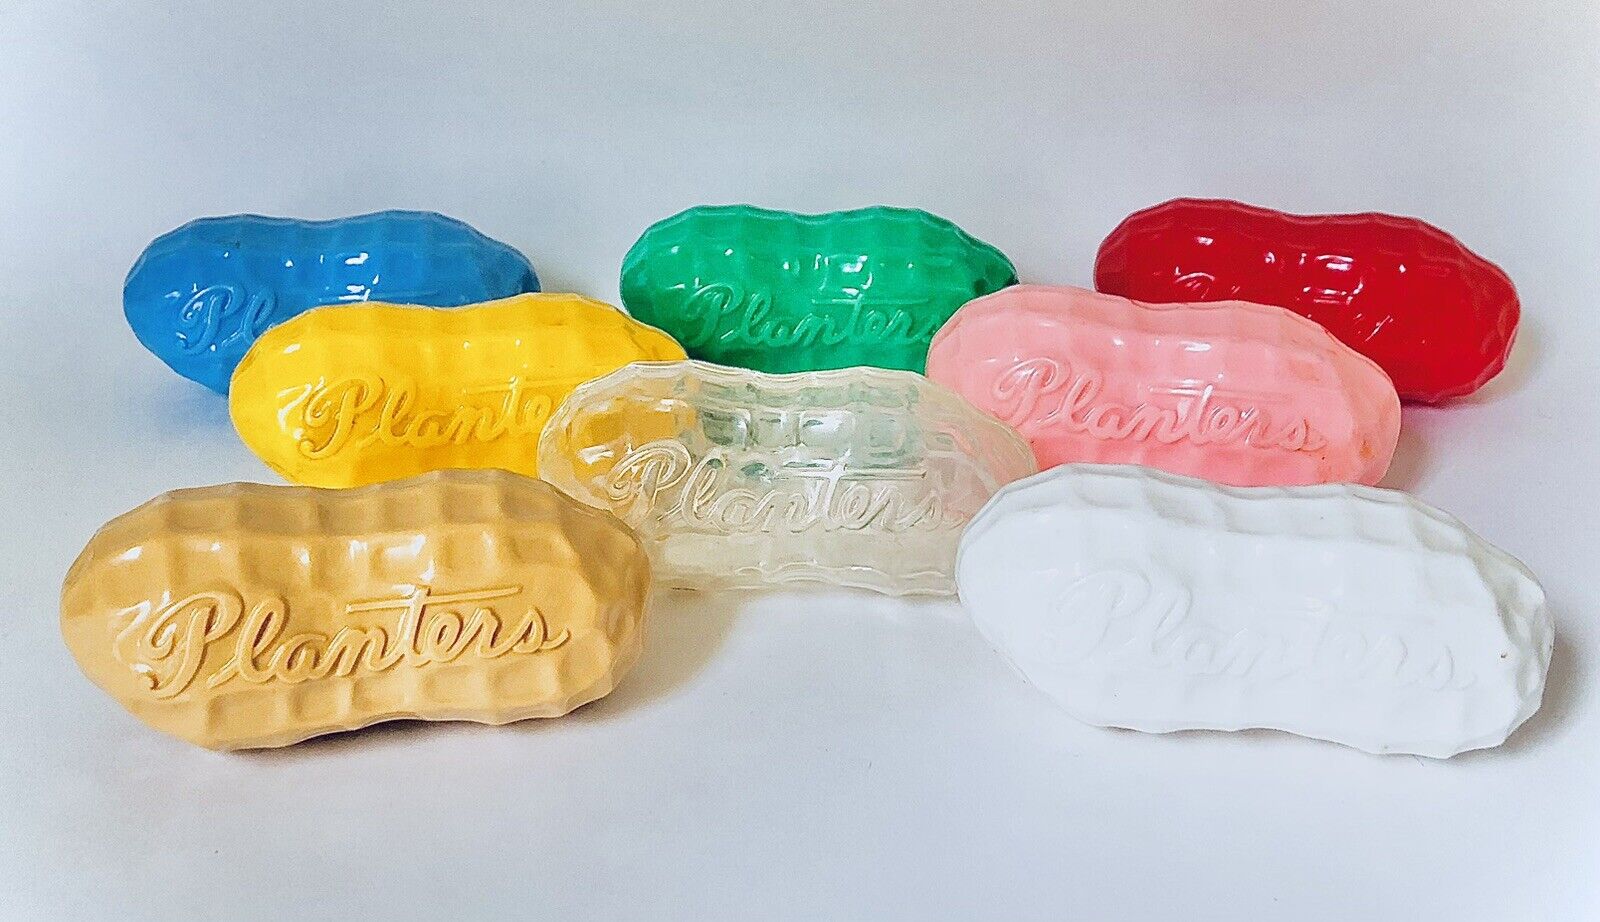 Vintage 1955 Planter’s PEANUT SHELL Candy Container Premium COMPLETE SET OF 8